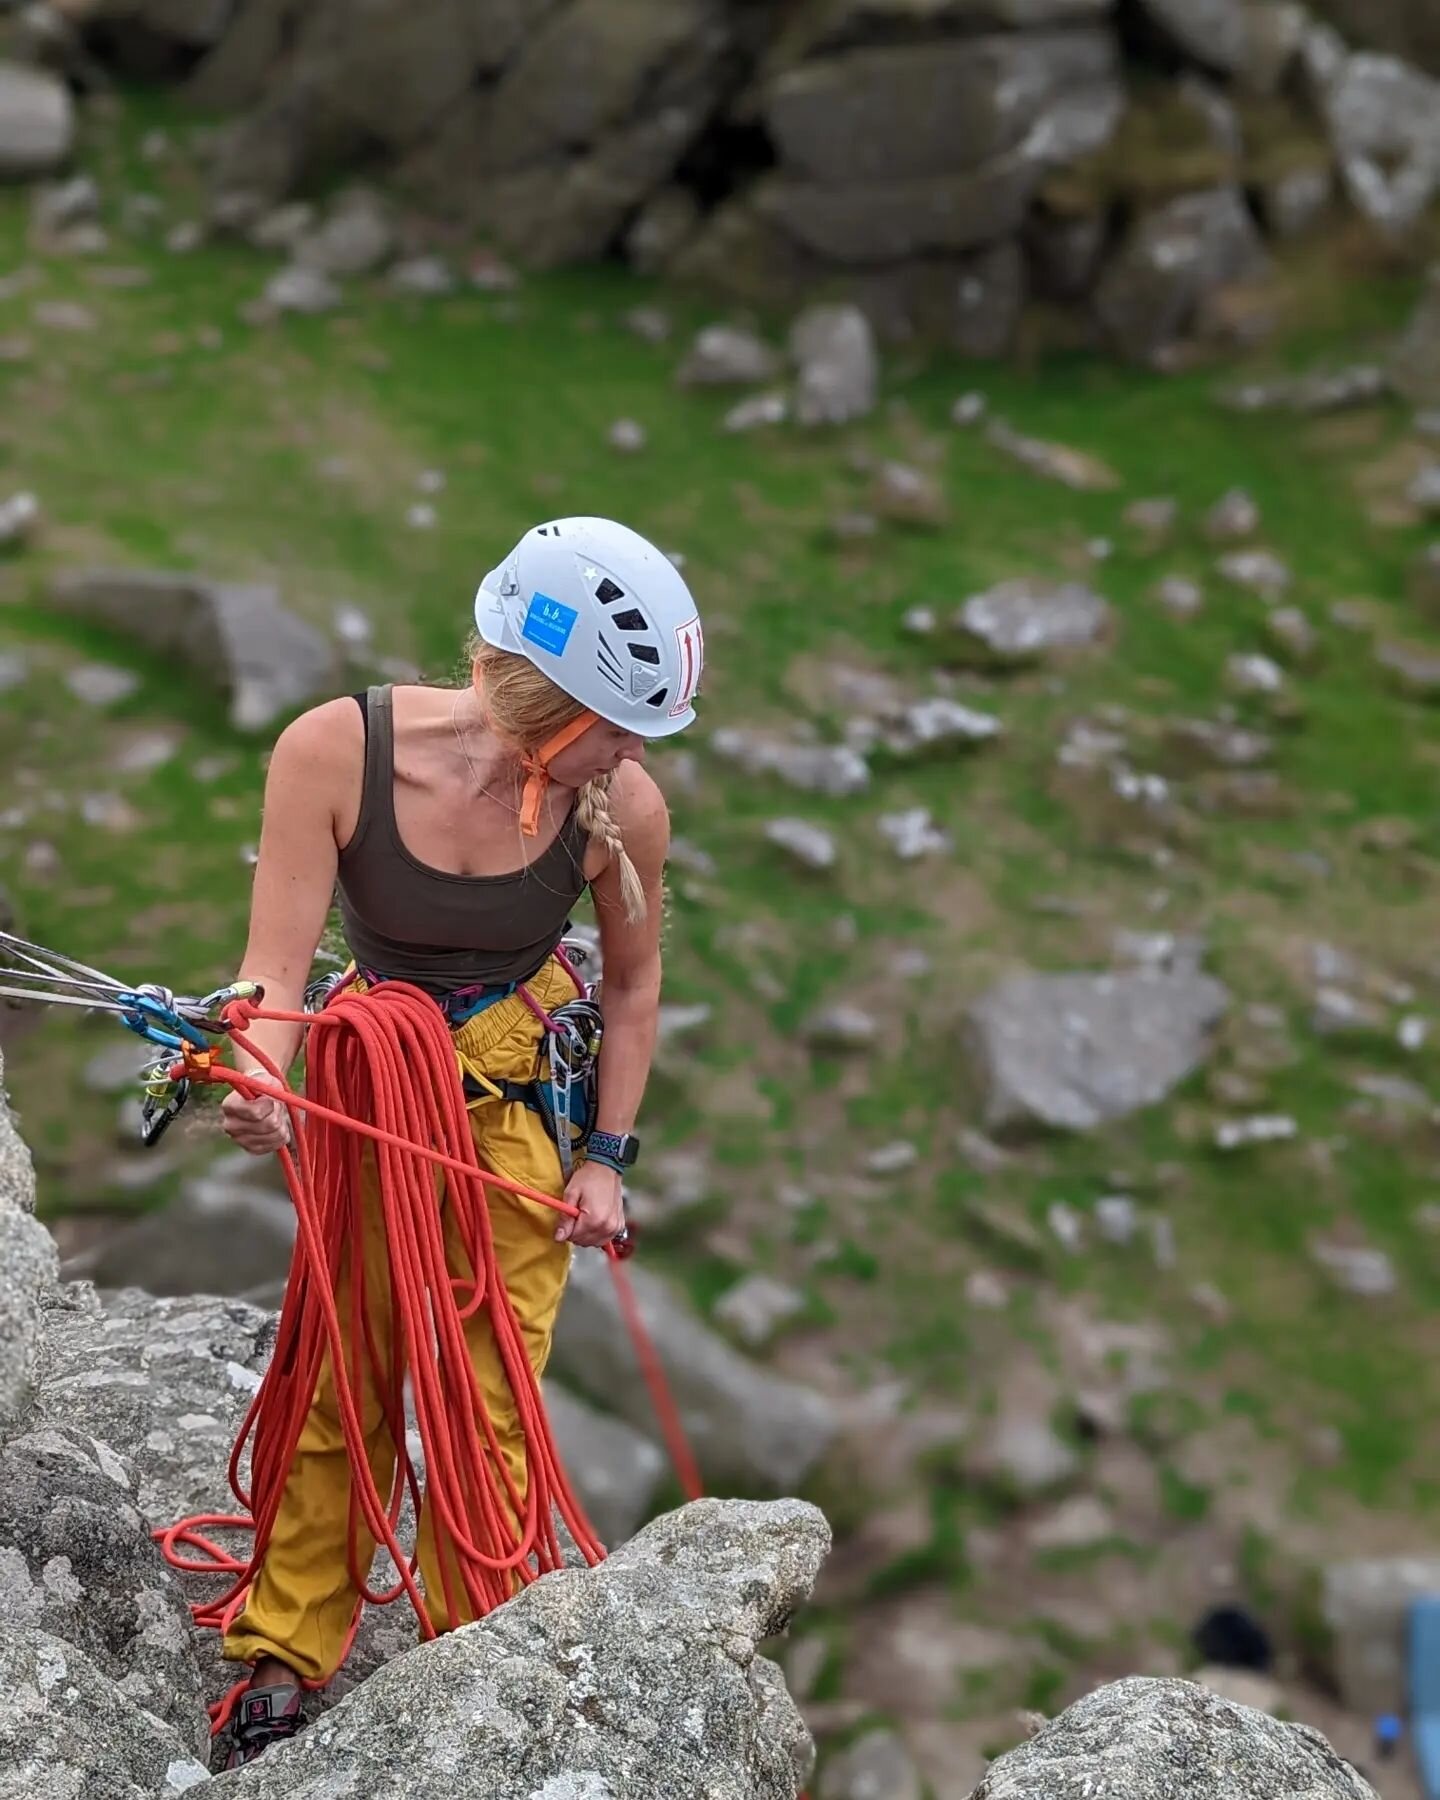 Want to learn how to trad climb? 

Traditional rock climbing courses available on Dartmoor National Park

Email info@climbdevon.com for more information or visit climbdevon.com

#climbdevon #climbing #rockclimbing #climb #climbinglife #climber #natur